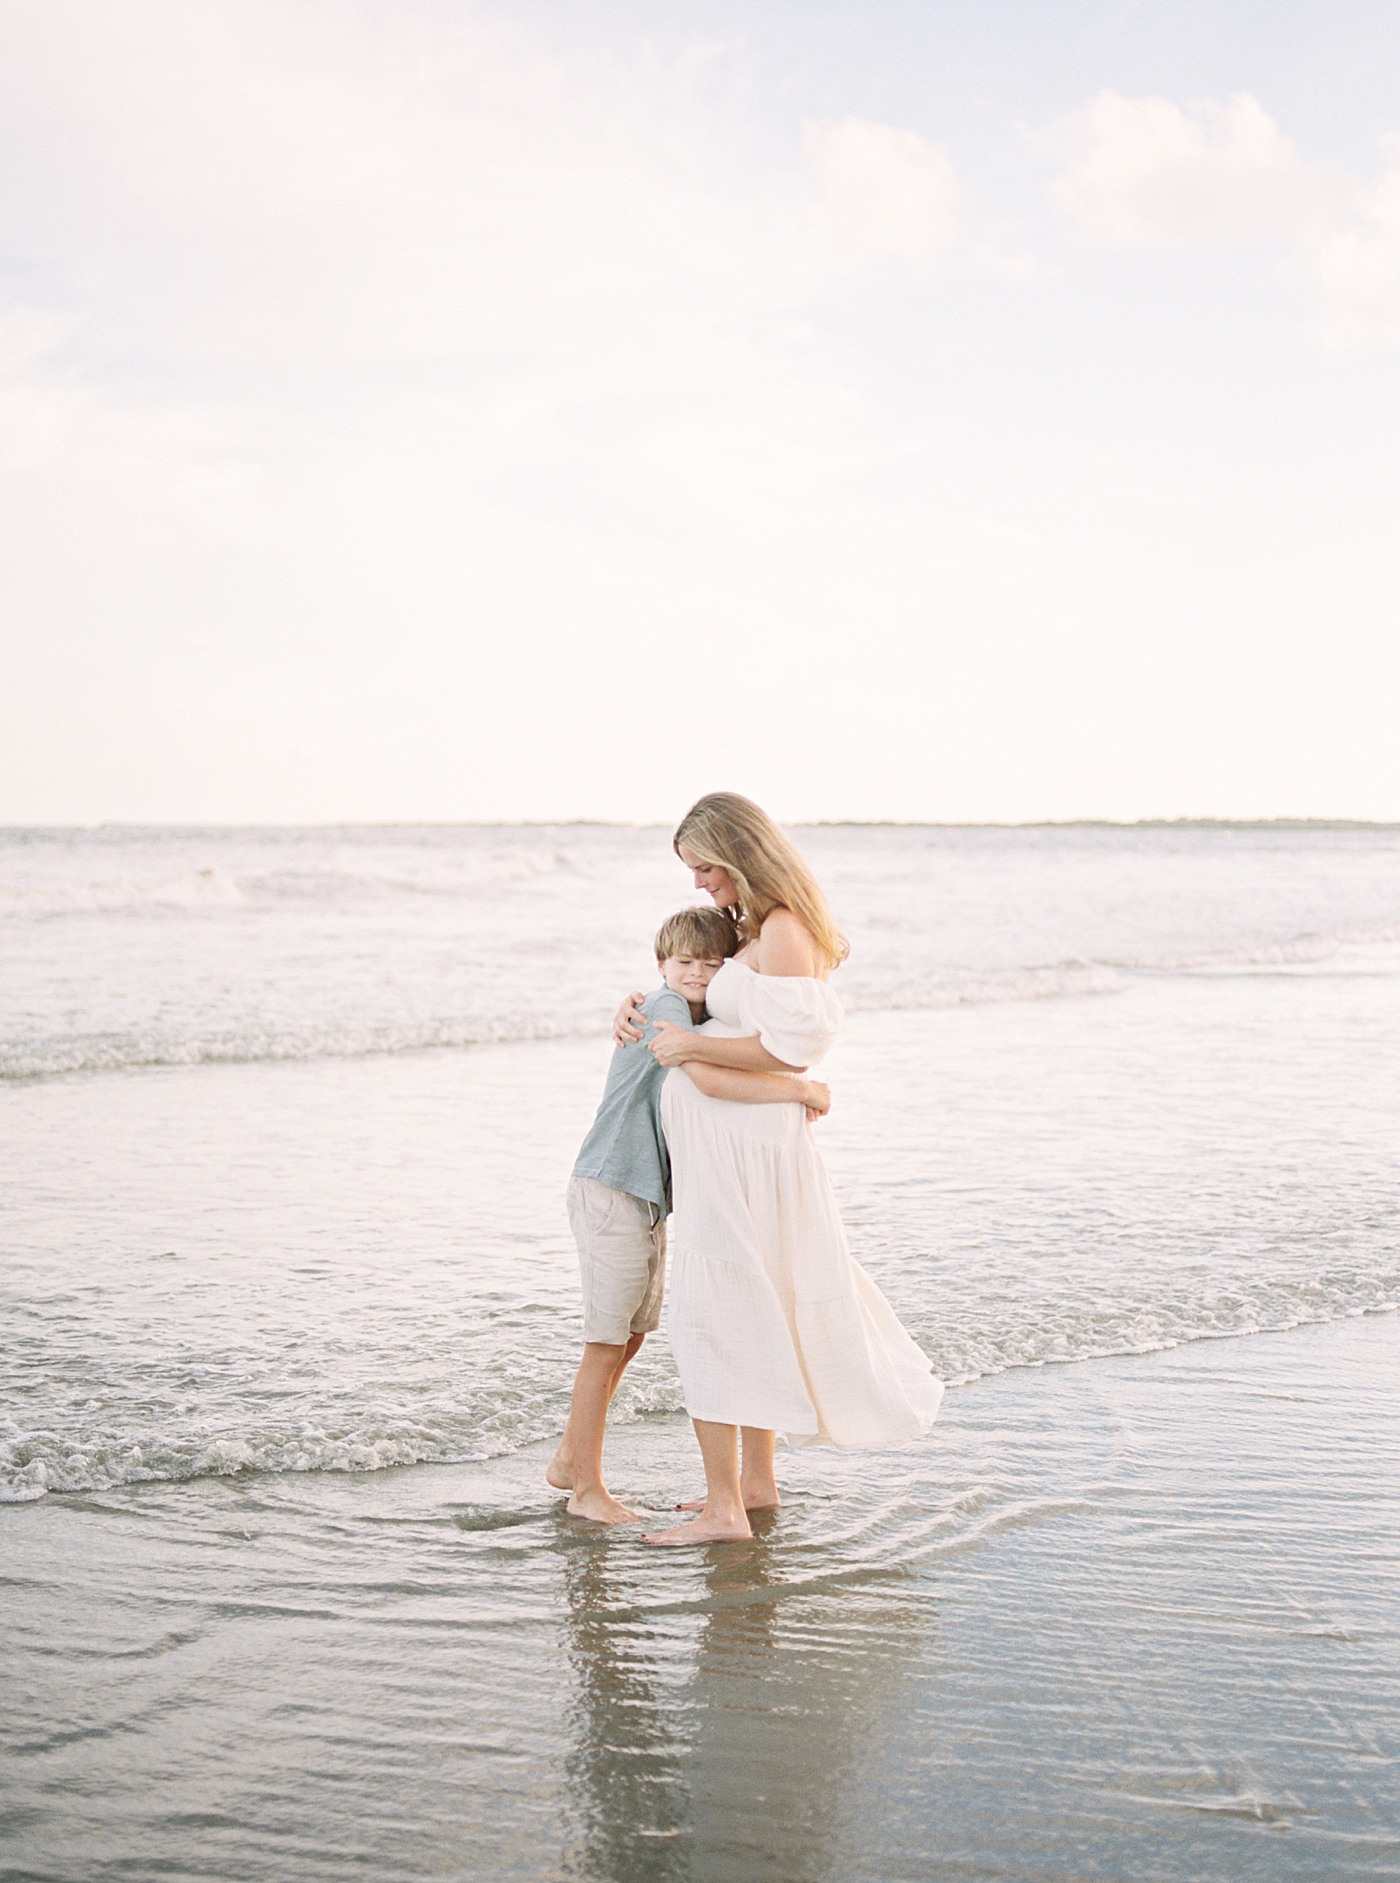 Pregnant mom hugging her little boy during their Maternity Session at Folly Beach | Image by Caitlyn Motycka